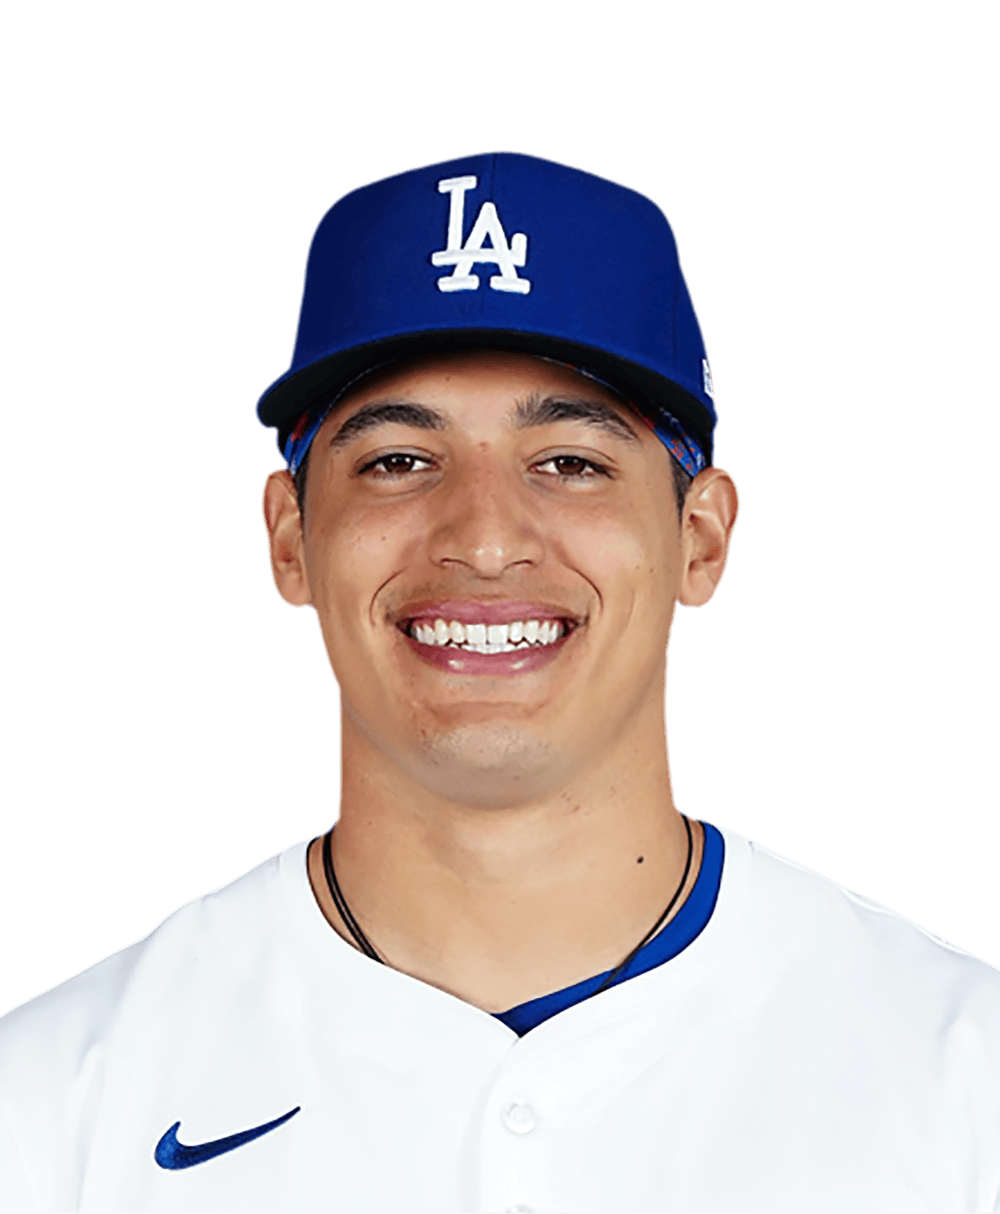 Where does Diego Cartaya fit into the Dodgers' future plans? - Los